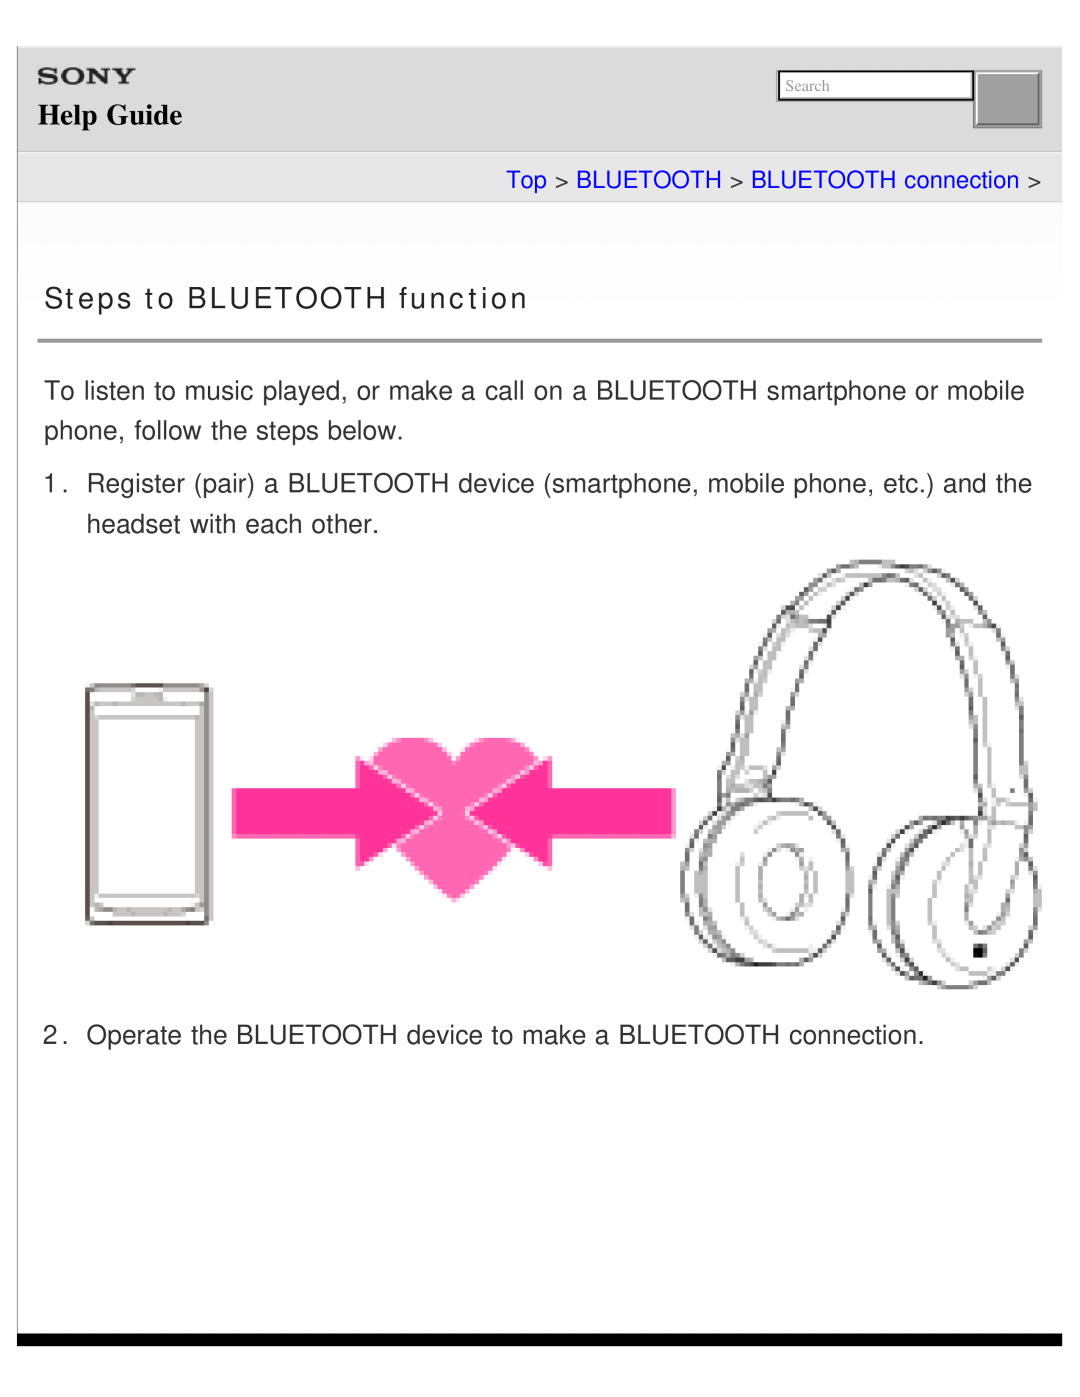 Sony DR-BTN200 manual Steps to BLUETOOTH function, Help Guide, Top BLUETOOTH BLUETOOTH connection 